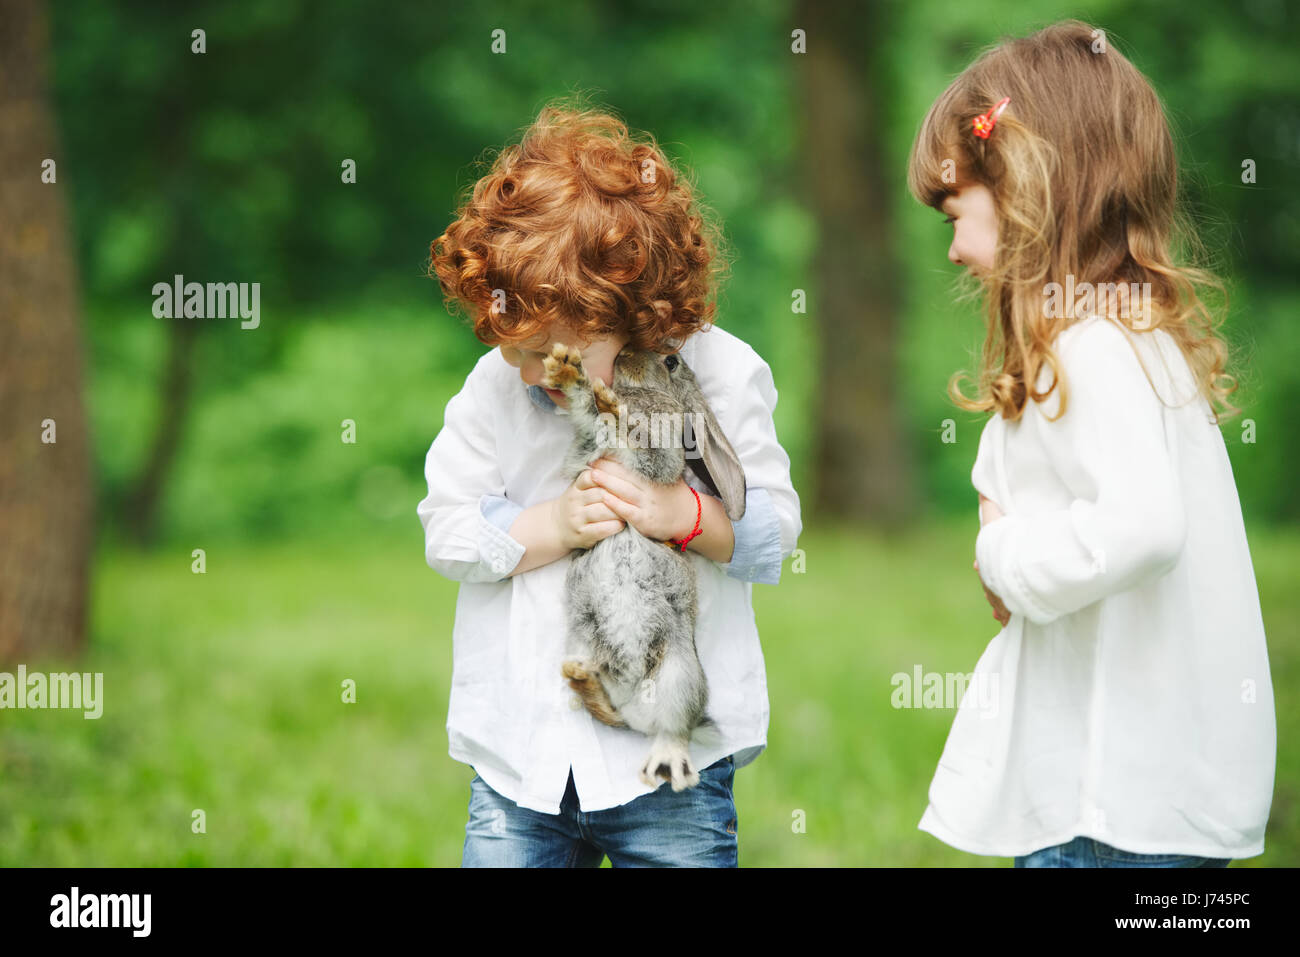 little boy and girl playing with rabbit Stock Photo